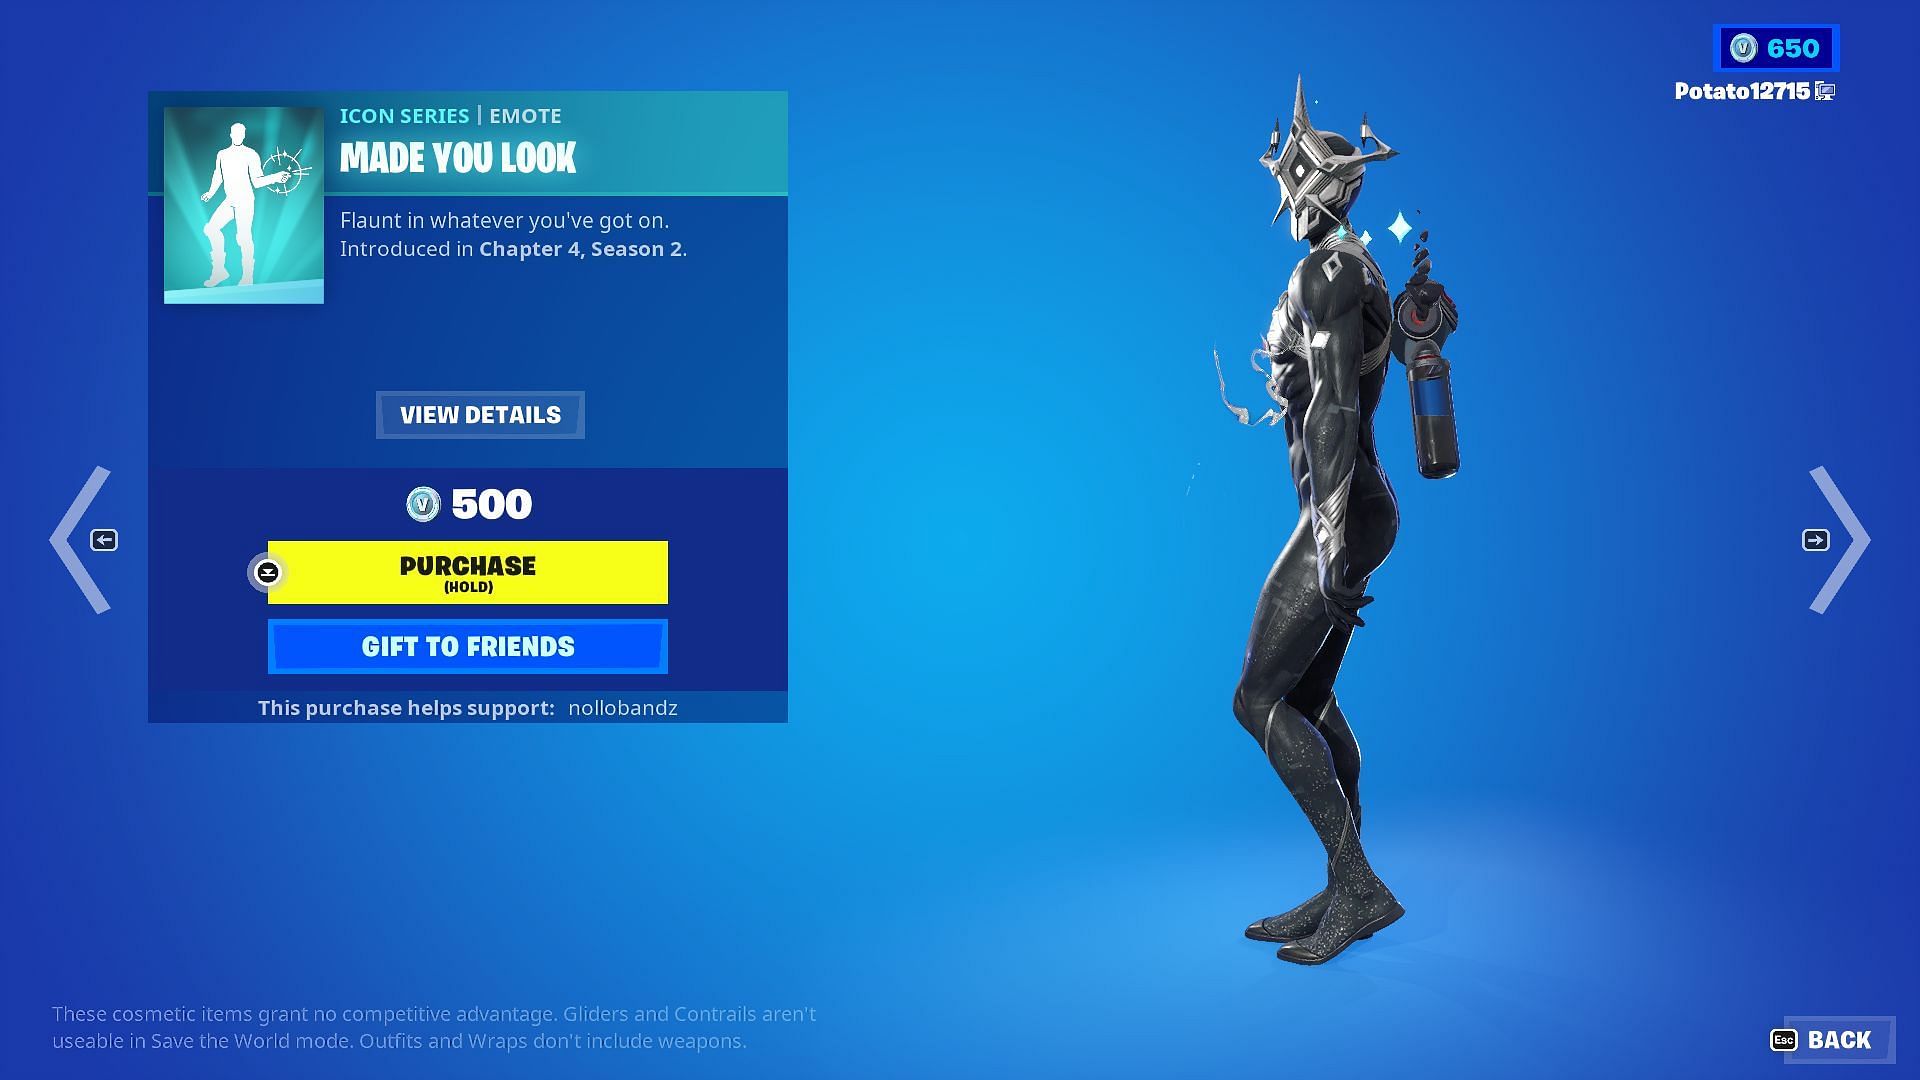 The Made You Look has become a must-have Emote in-game (Image via Epic Games/Fortnite)